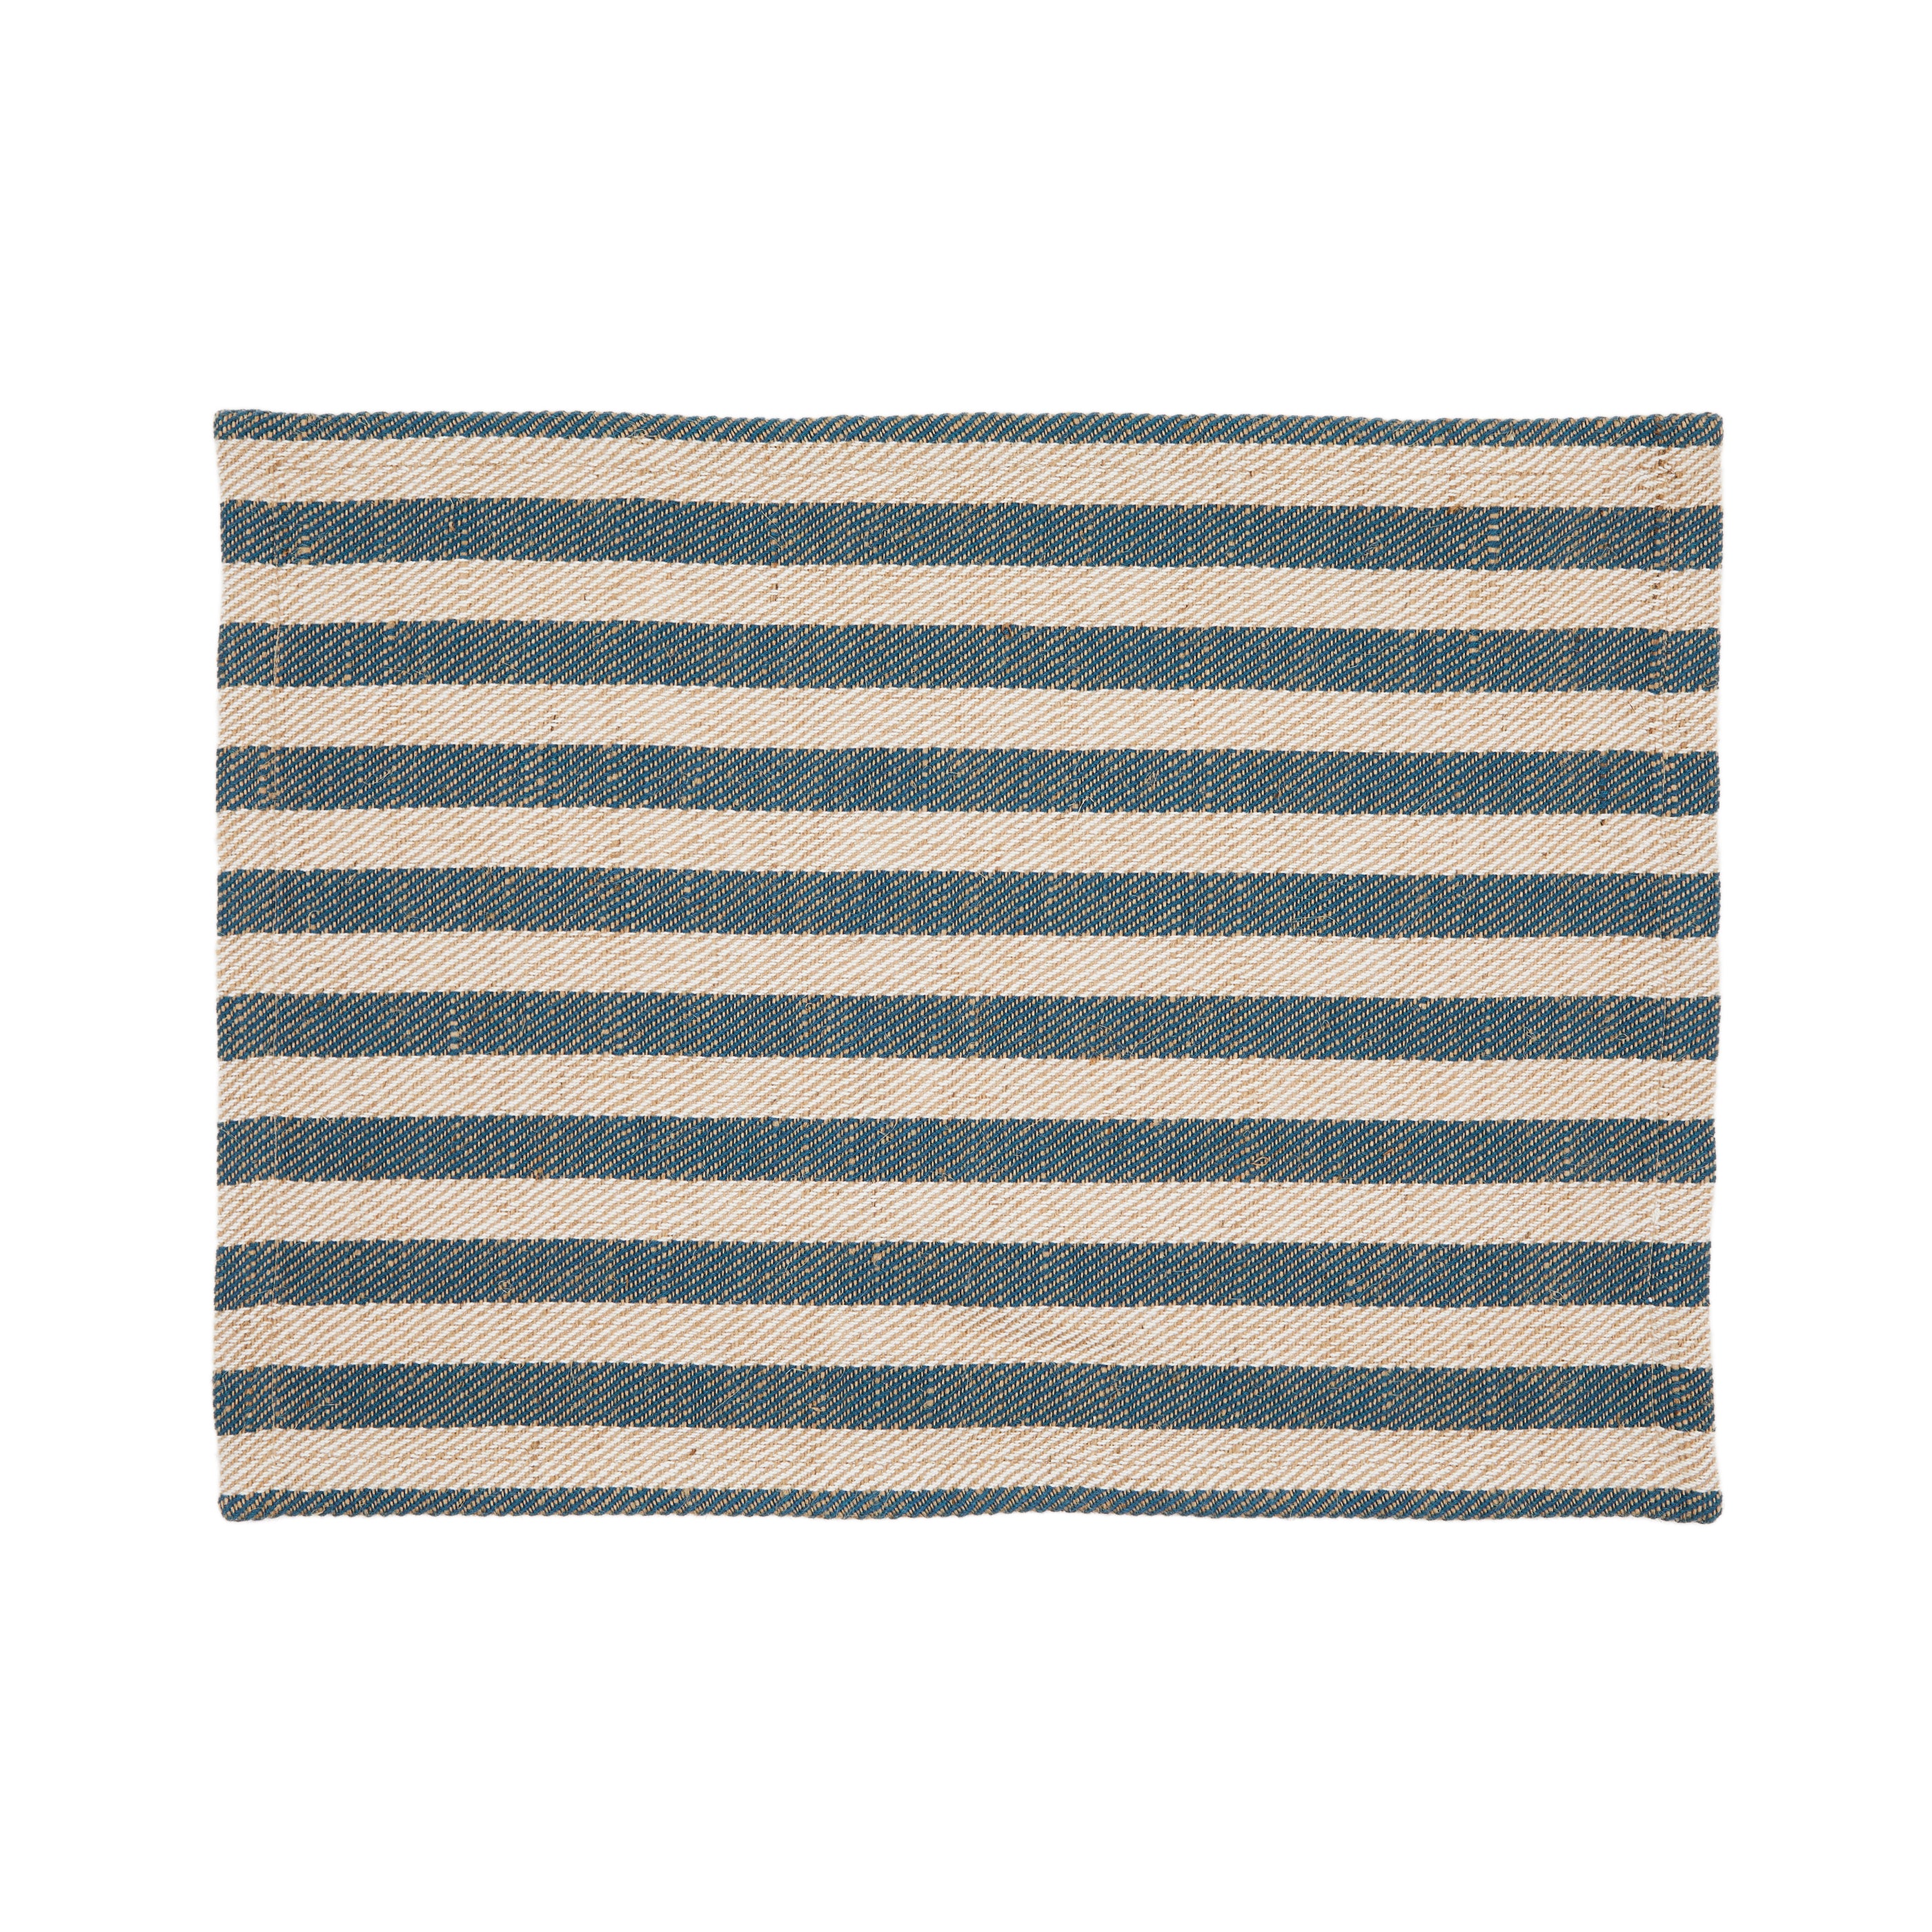 Selvana Set of 2 Custom Cotton Table Mats with Beige and Green Stripes